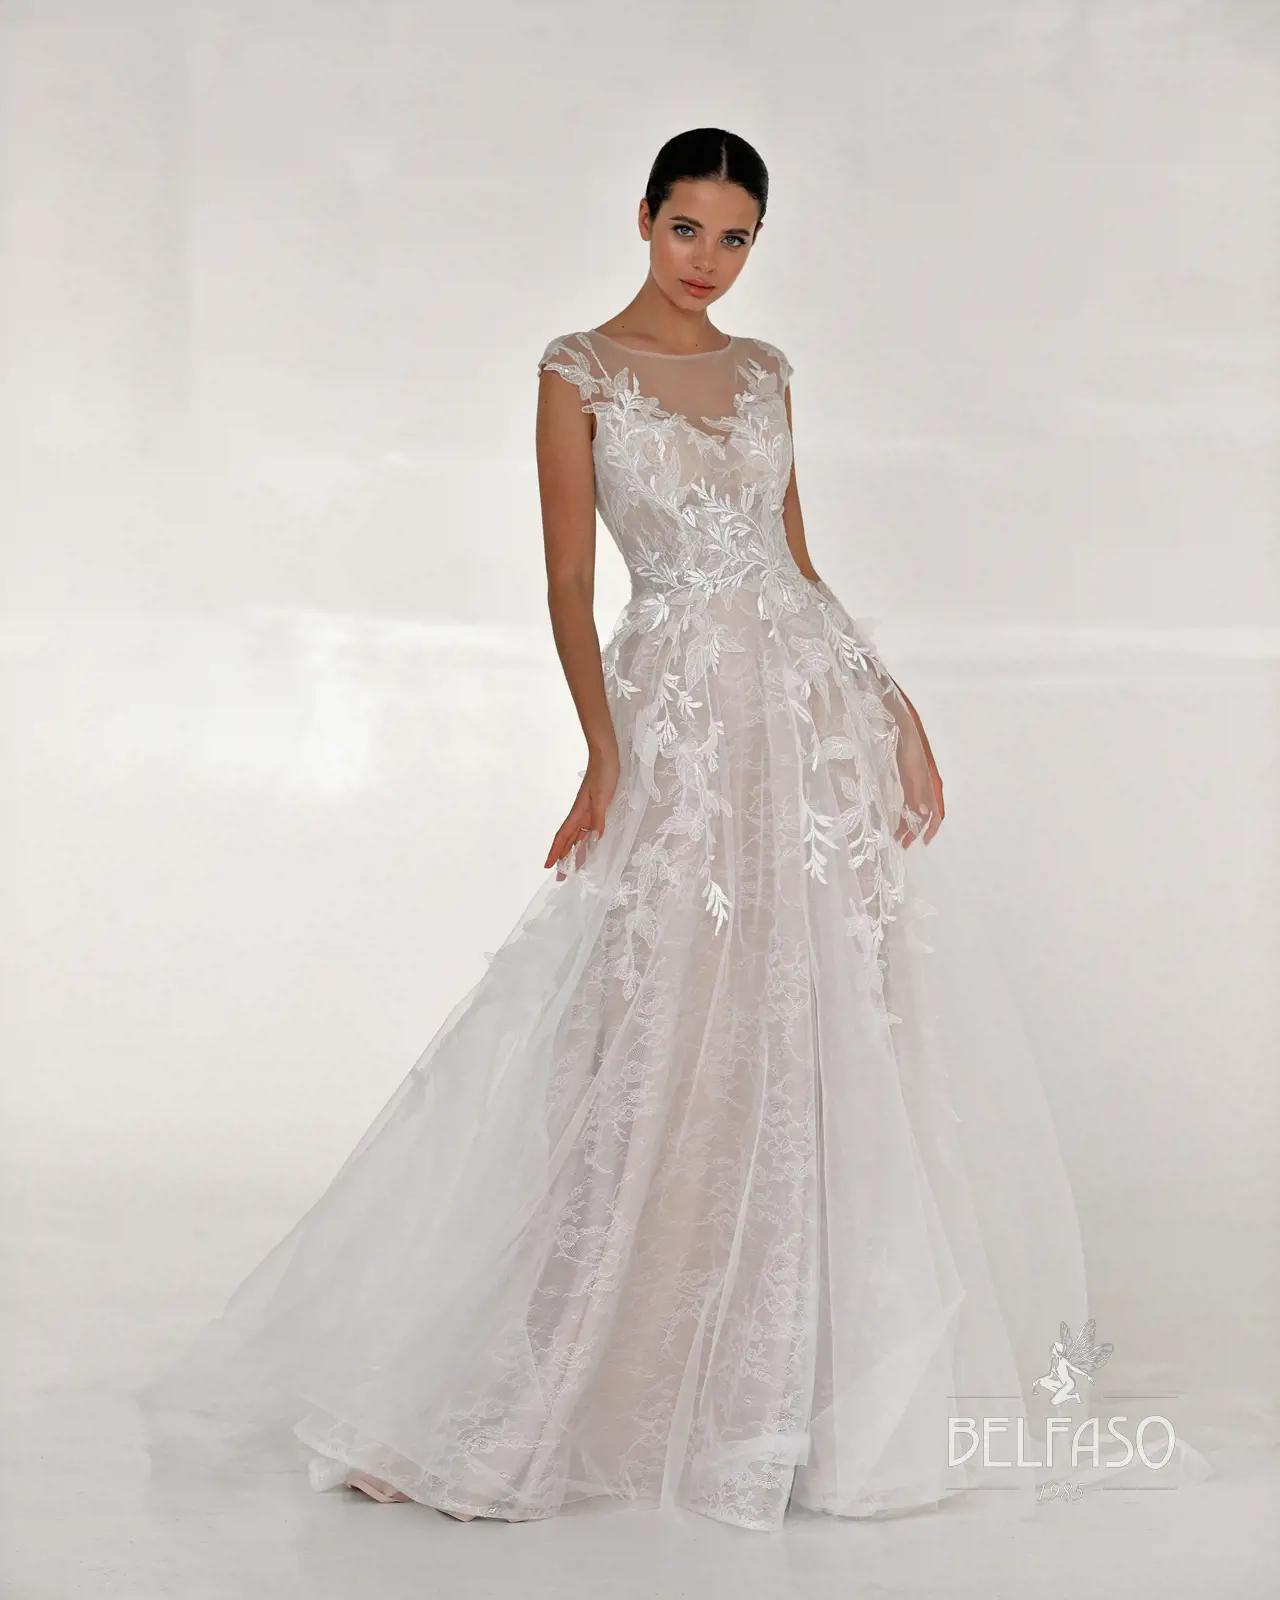 Bridal Gowns for Your Winter Wedding Image